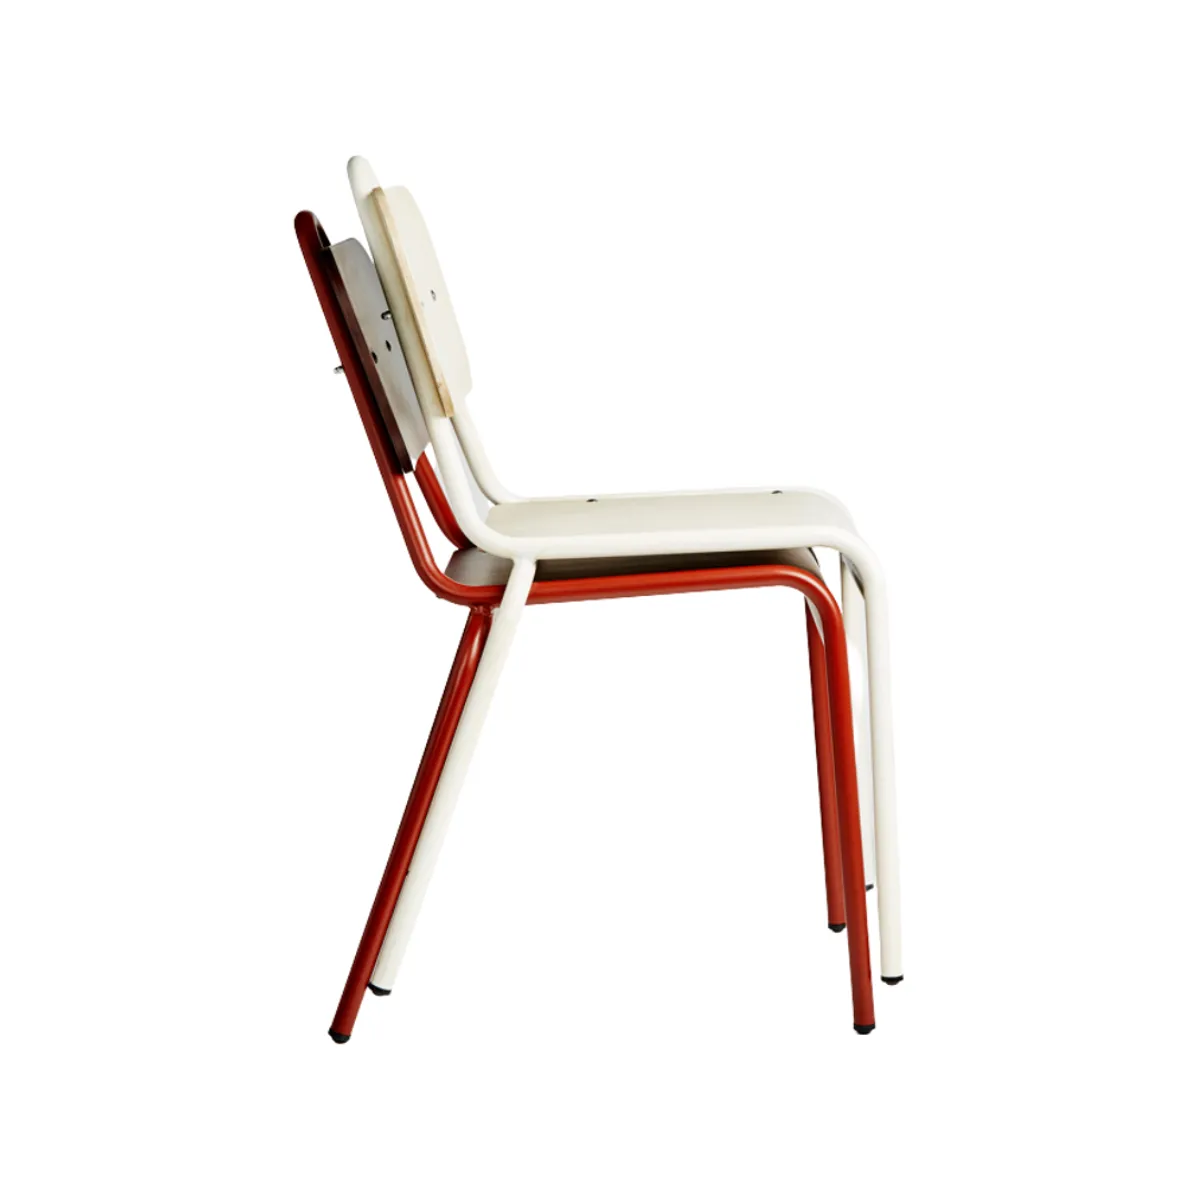 Elementary stacking chair